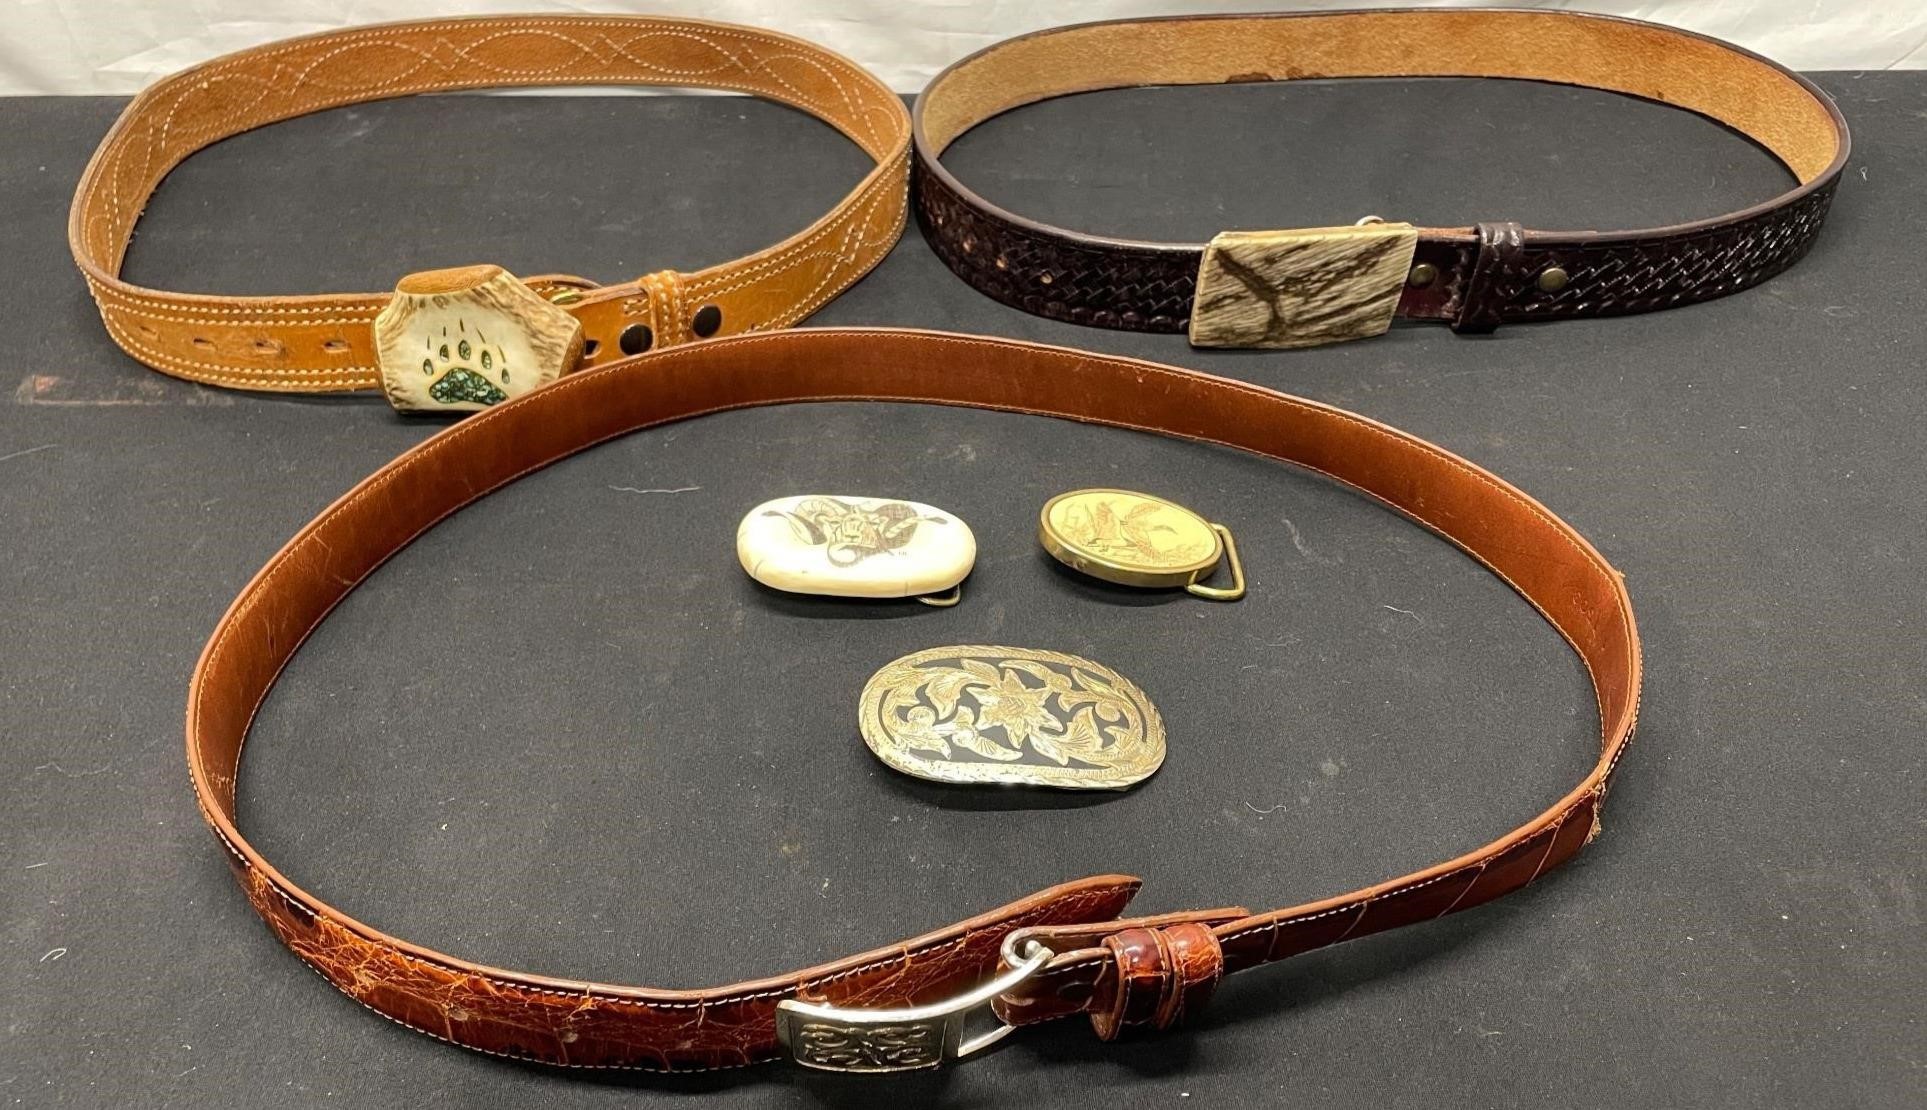 3 Belts And 3 Buckles; Ivory, Bone, Silver